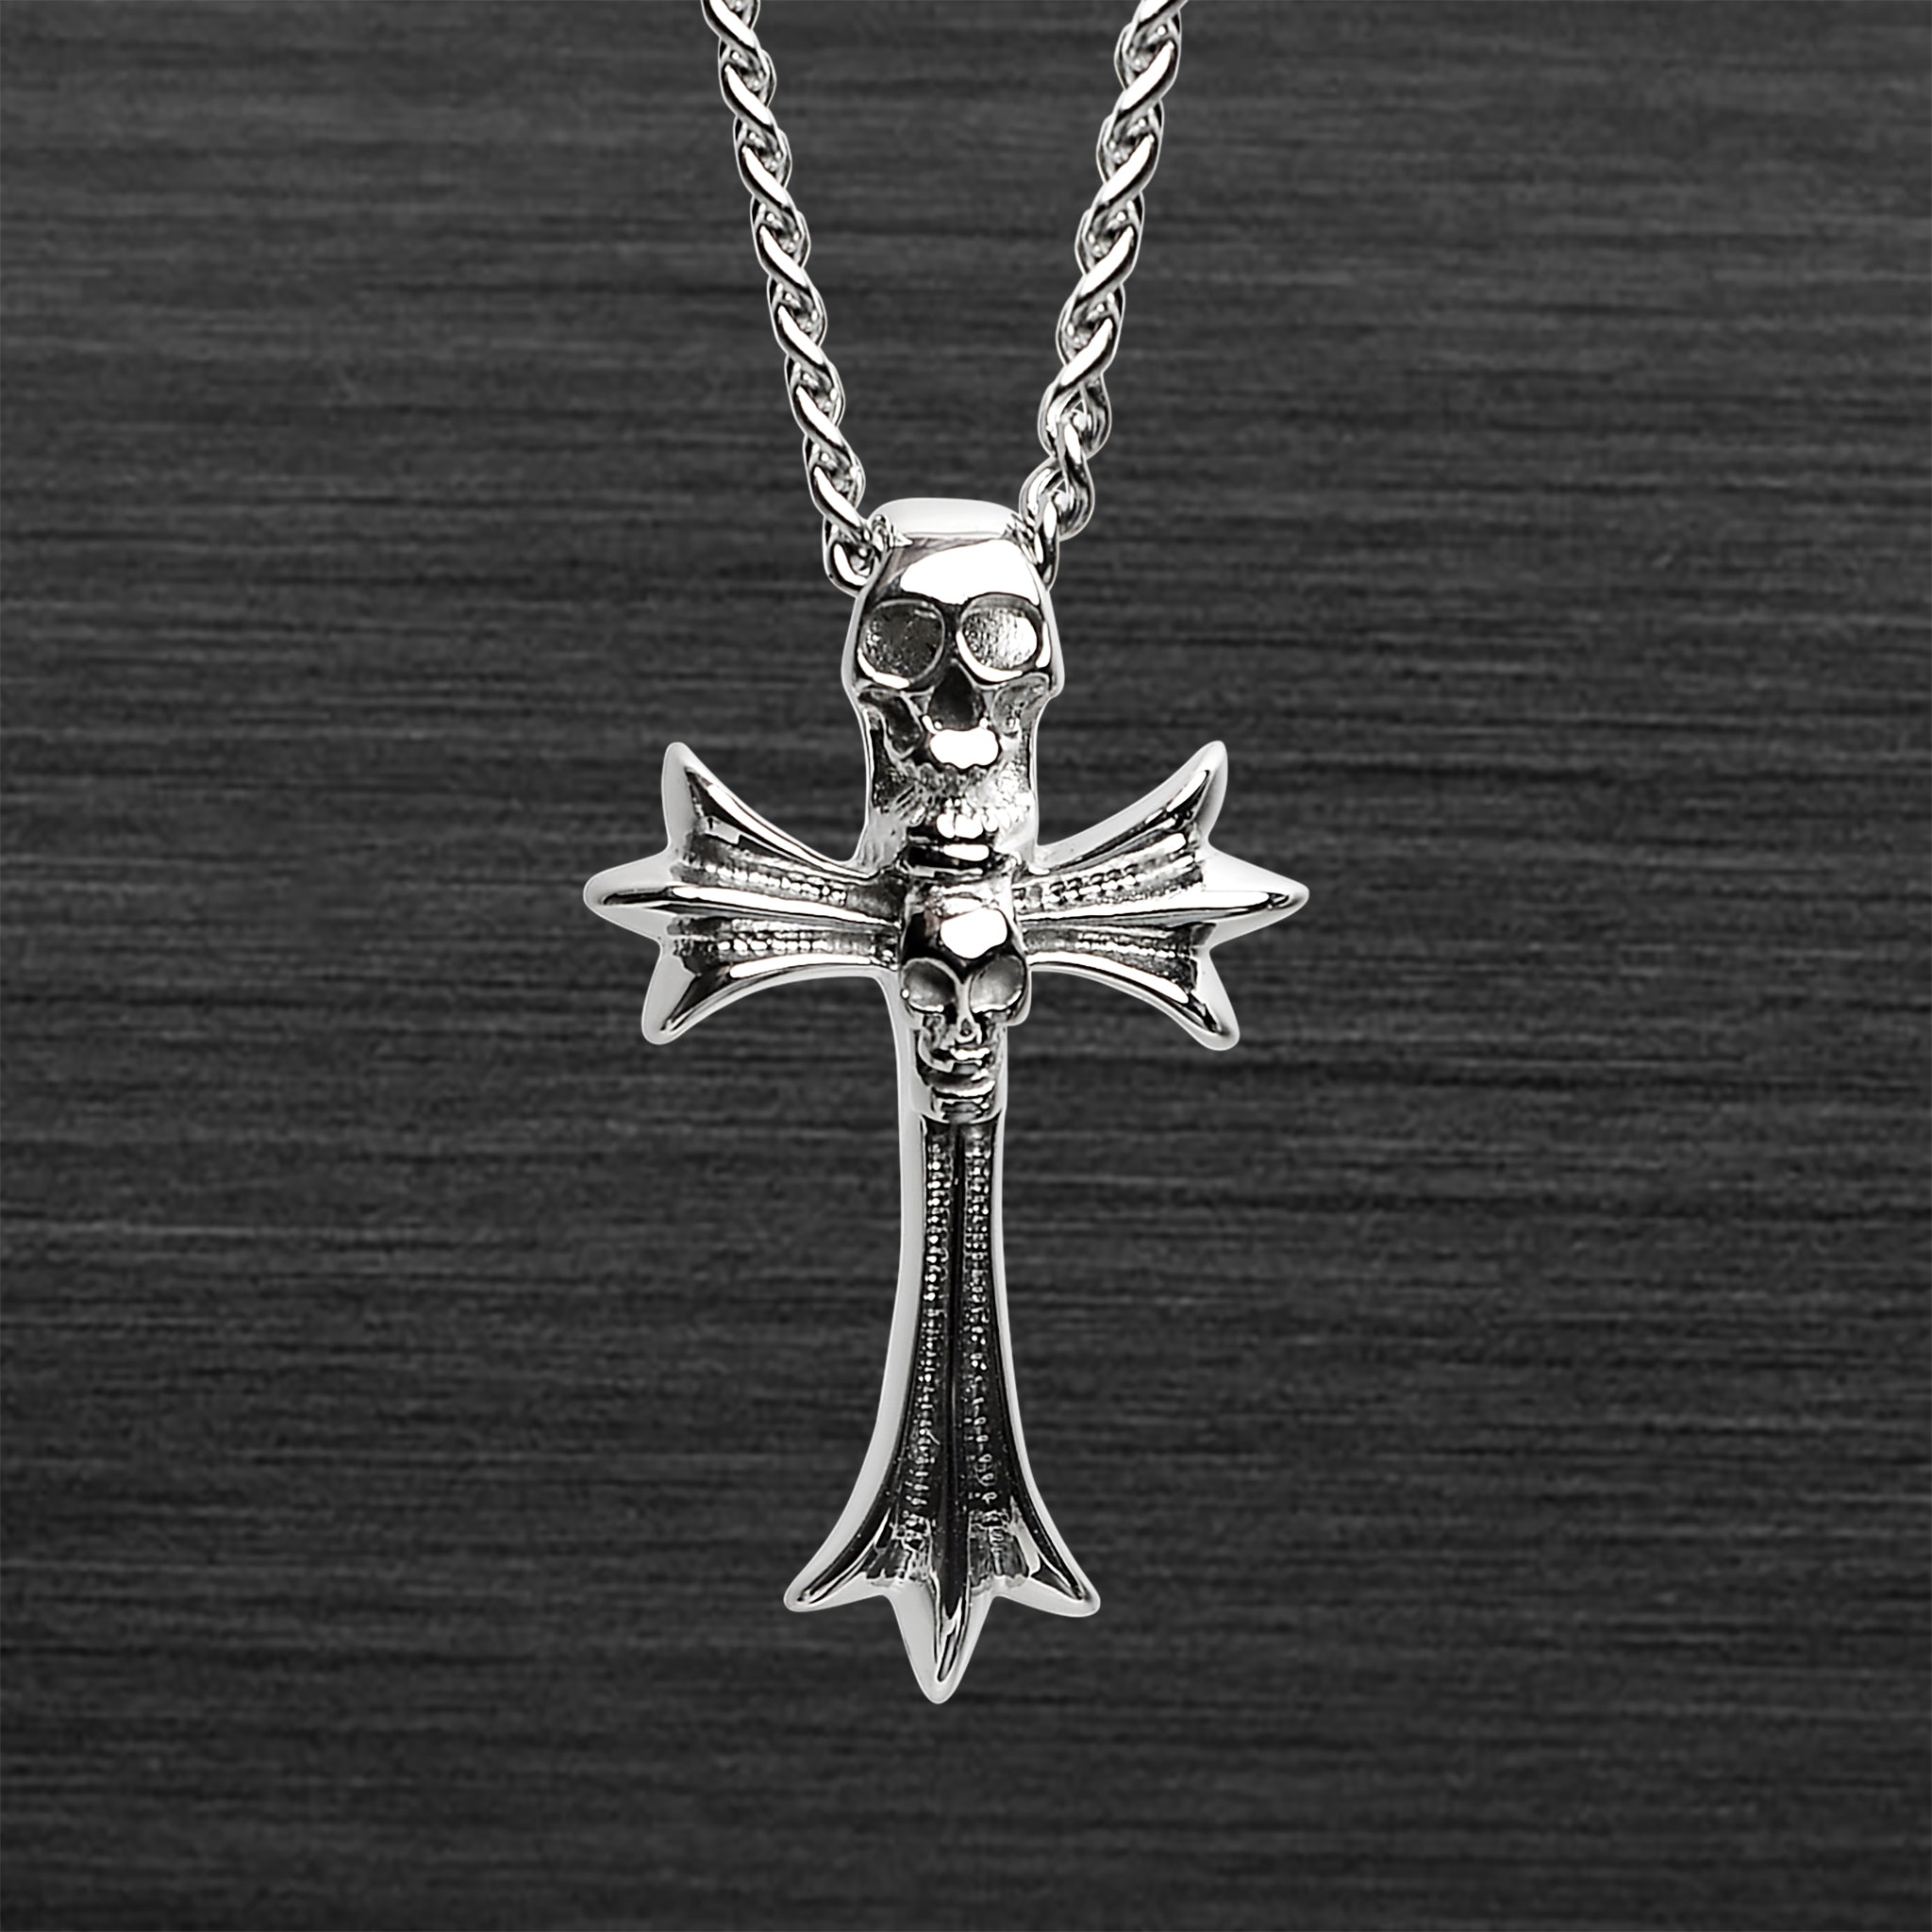 Stainless Steel SKULL Cross Curb Chain Necklace / PDJ3474-RTL